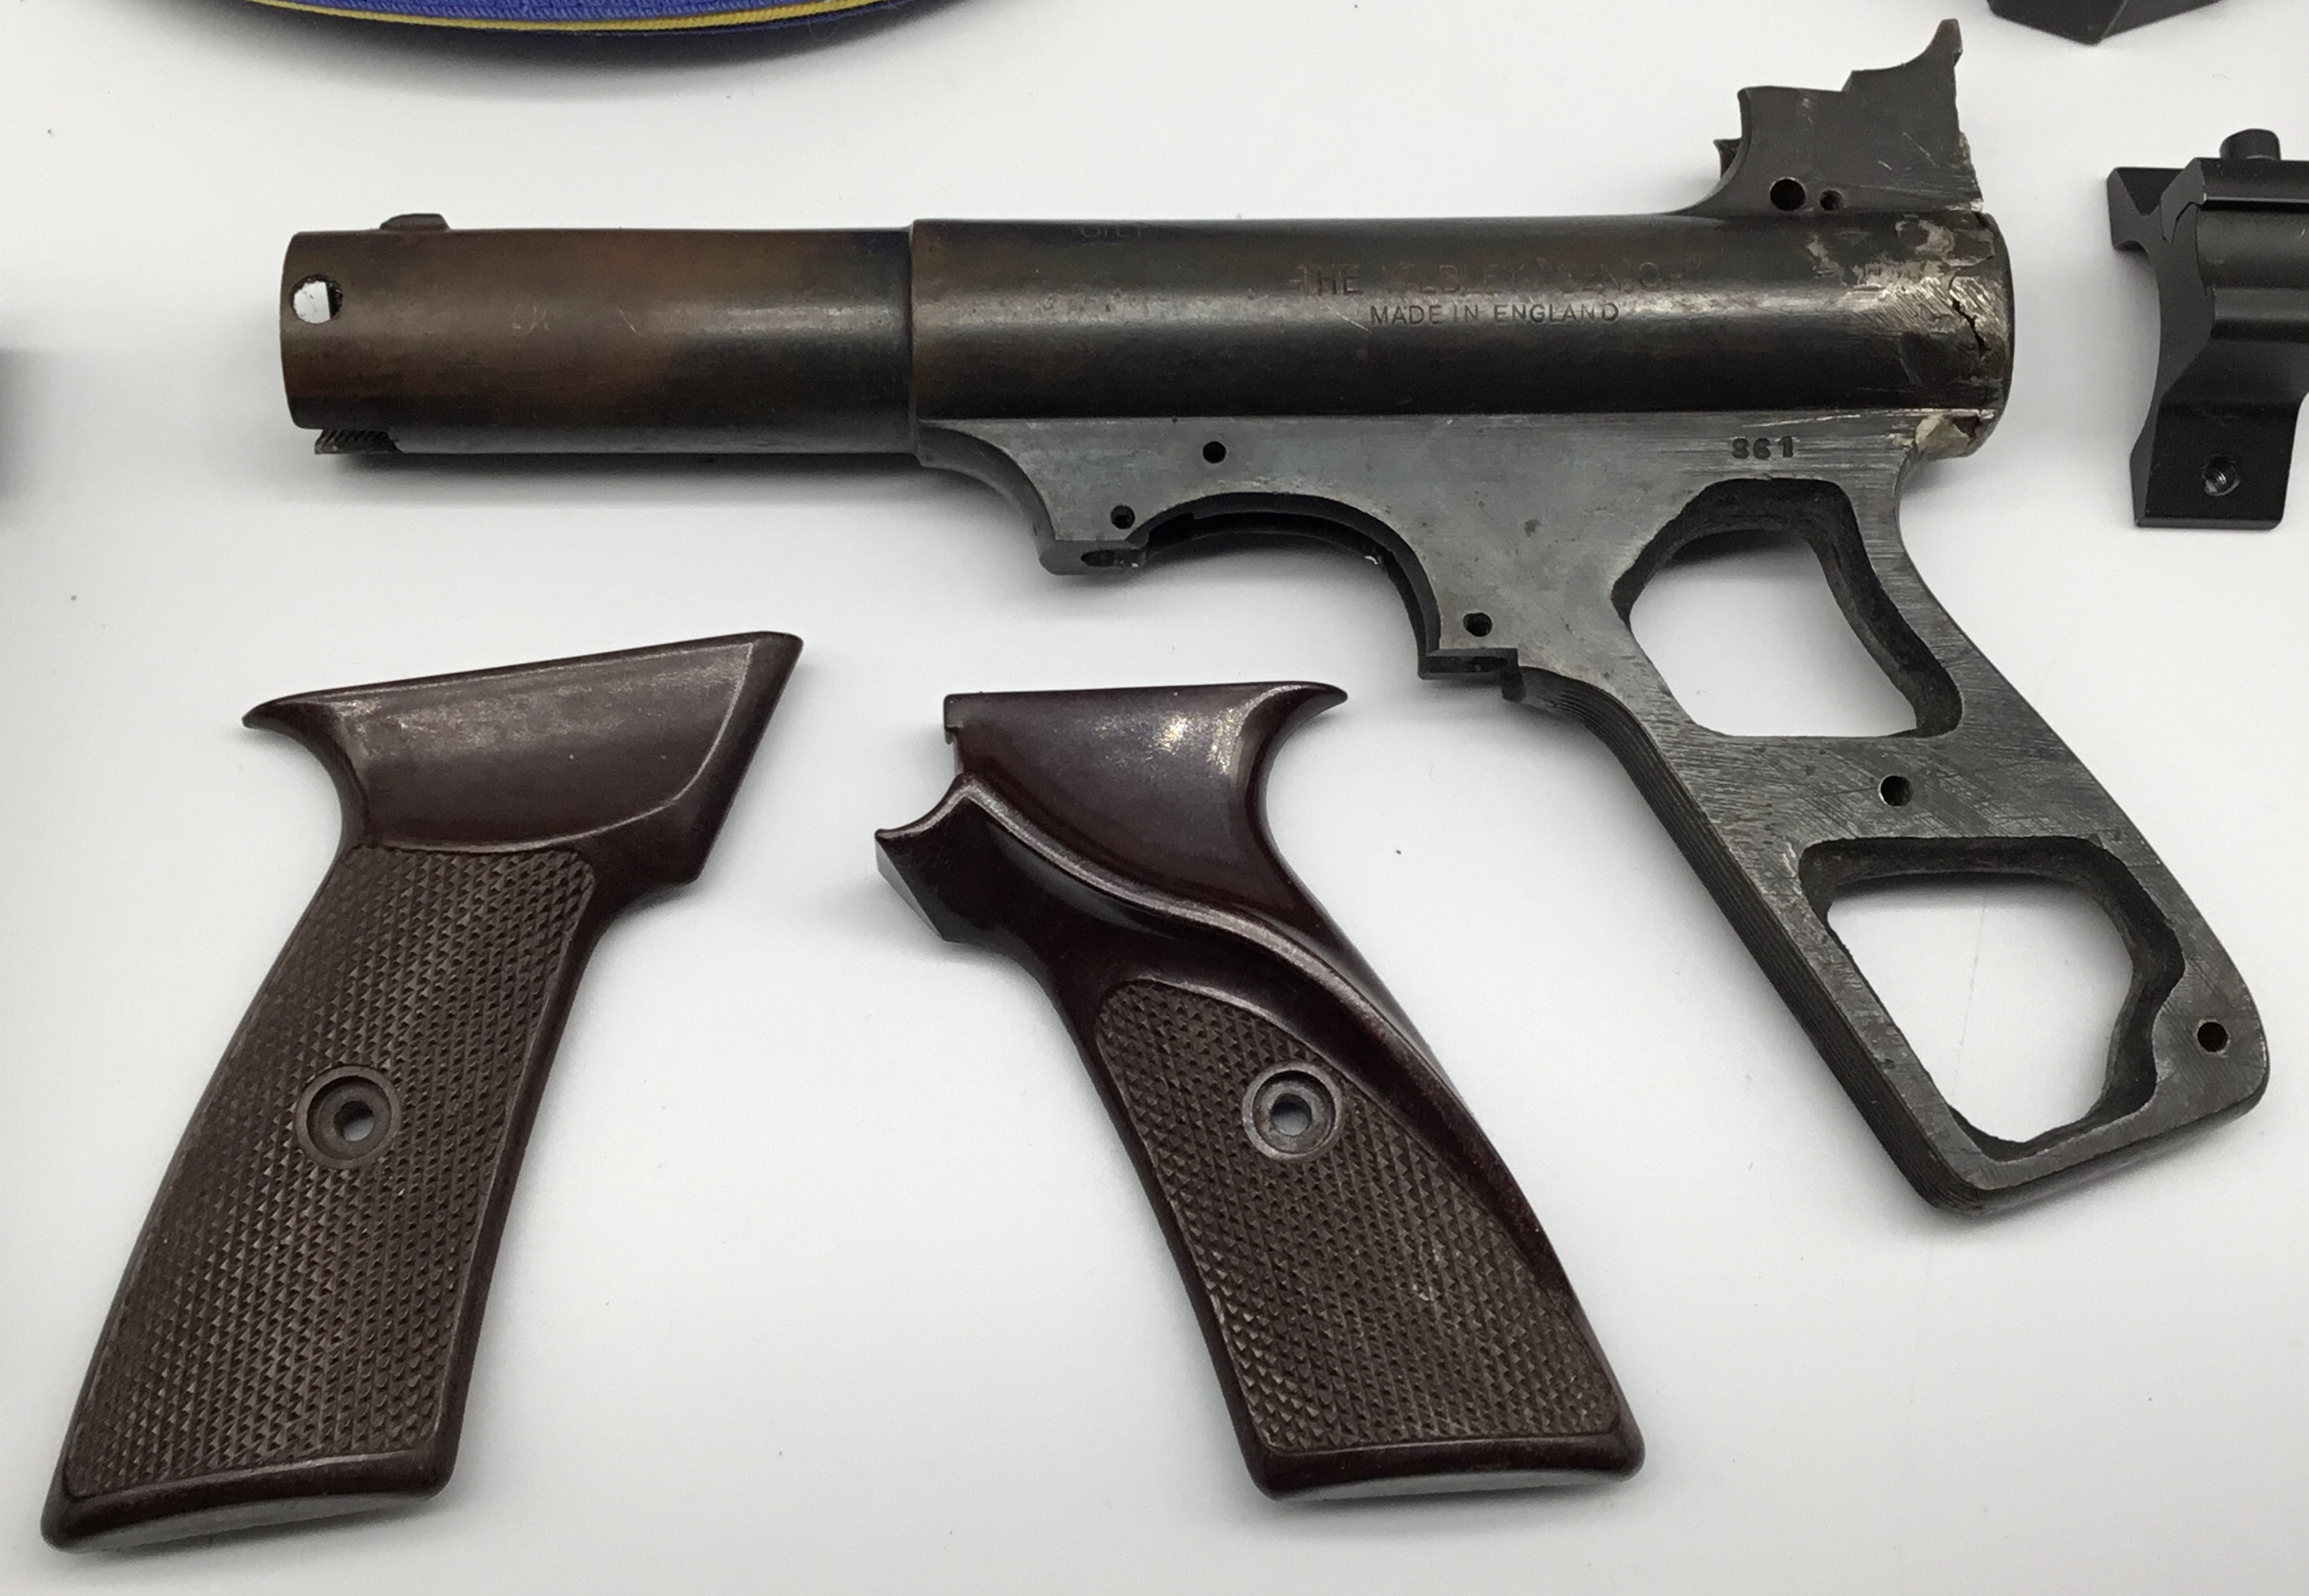 Collection of sights and other parts for Webley air pistols and rifles, plus a Webley baseball cap. - Image 3 of 8